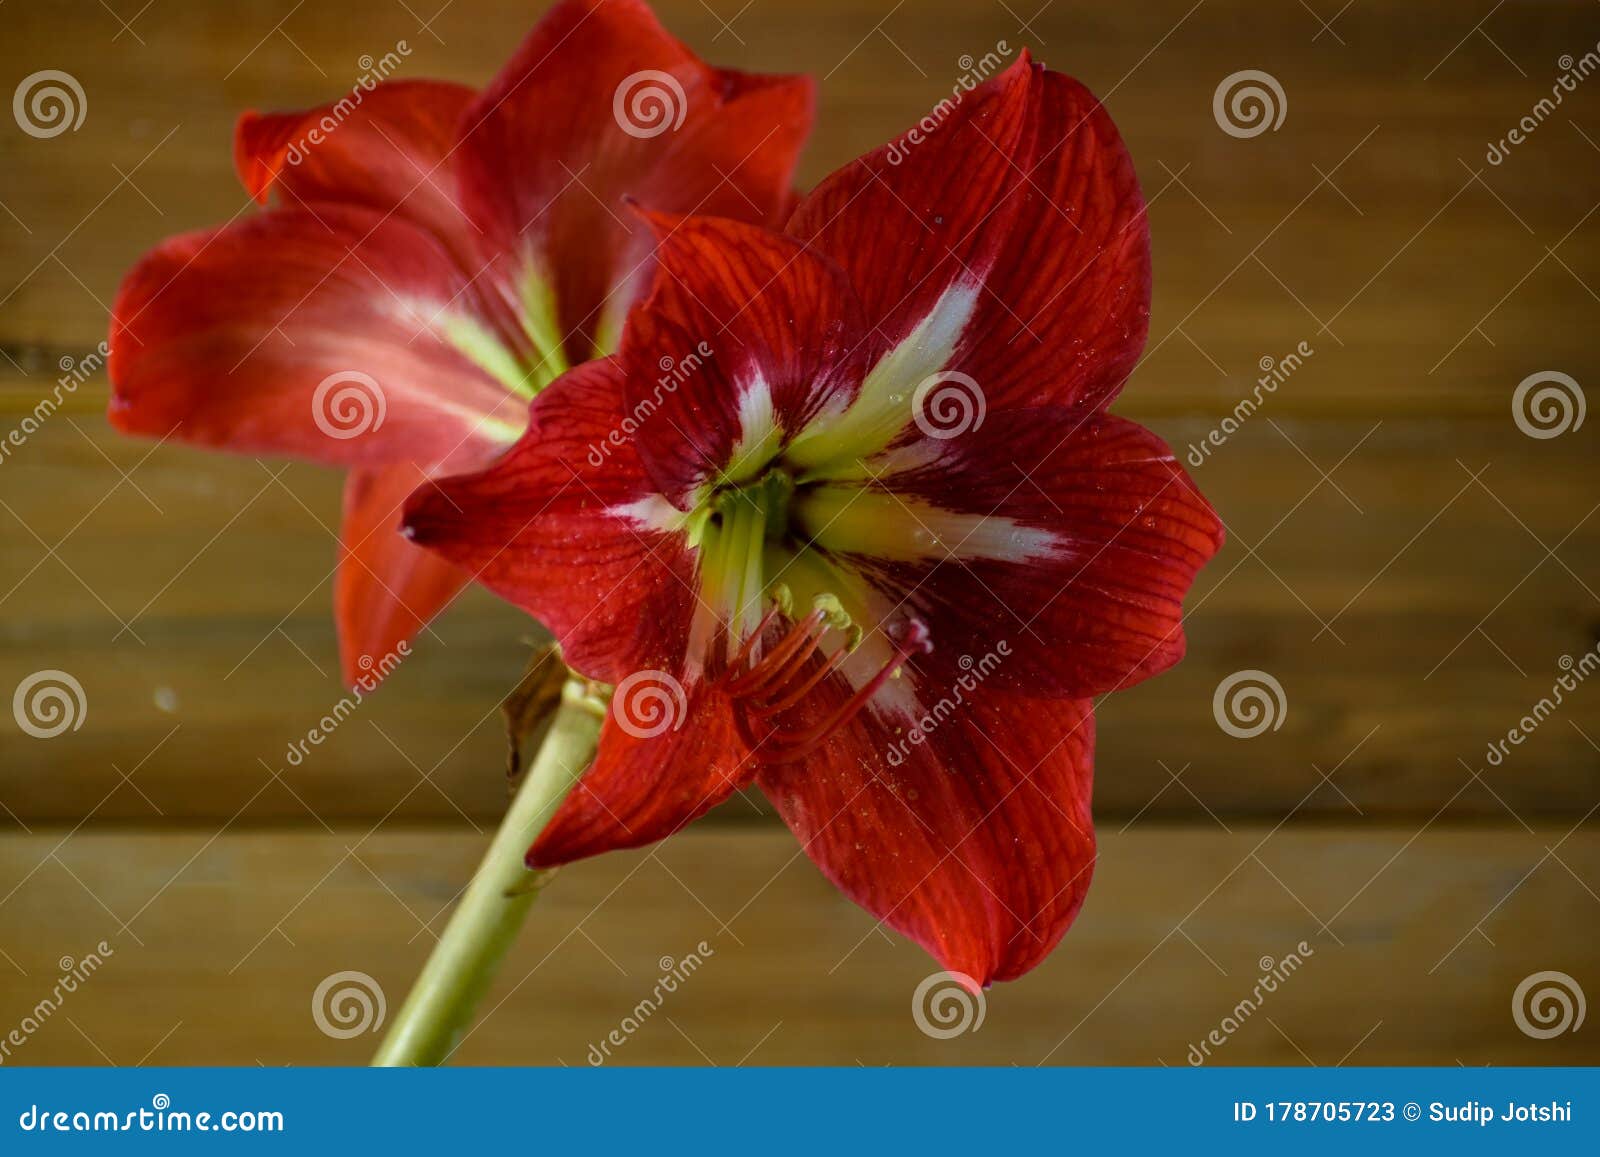 Beautiful Closeup Photograph of Red Easter Lily Flower Stock Image ...